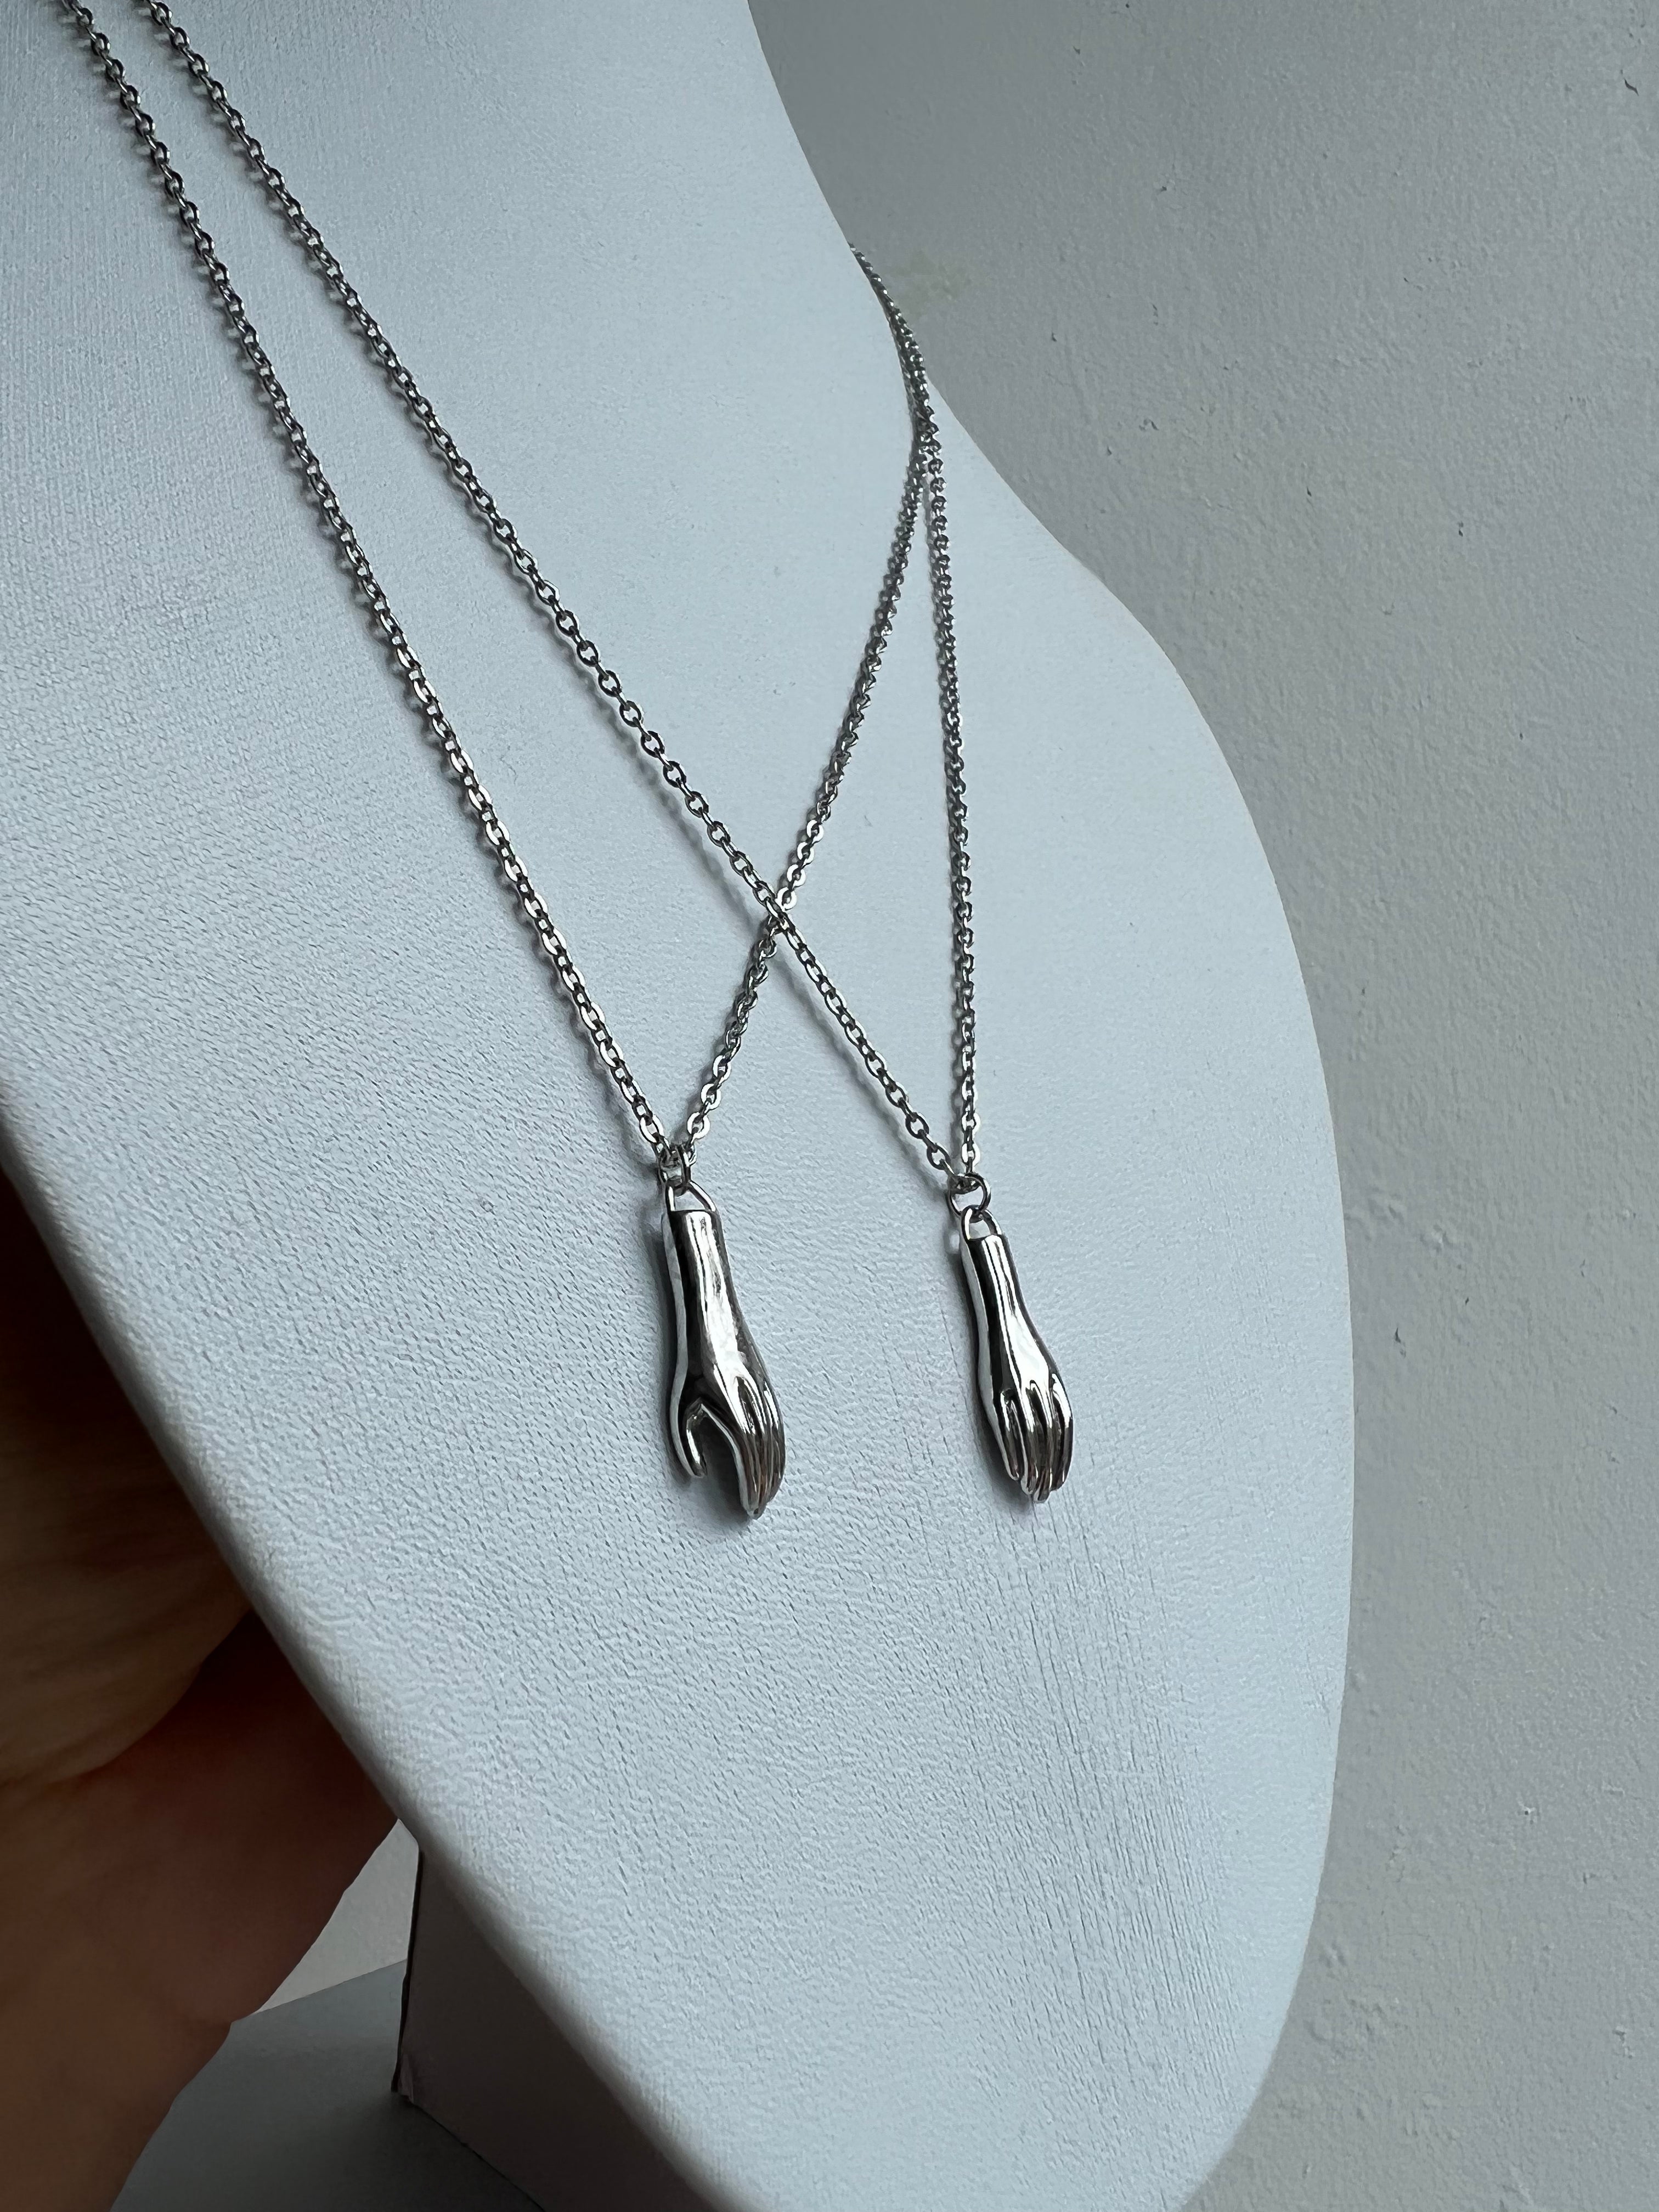 Friendship necklace duo